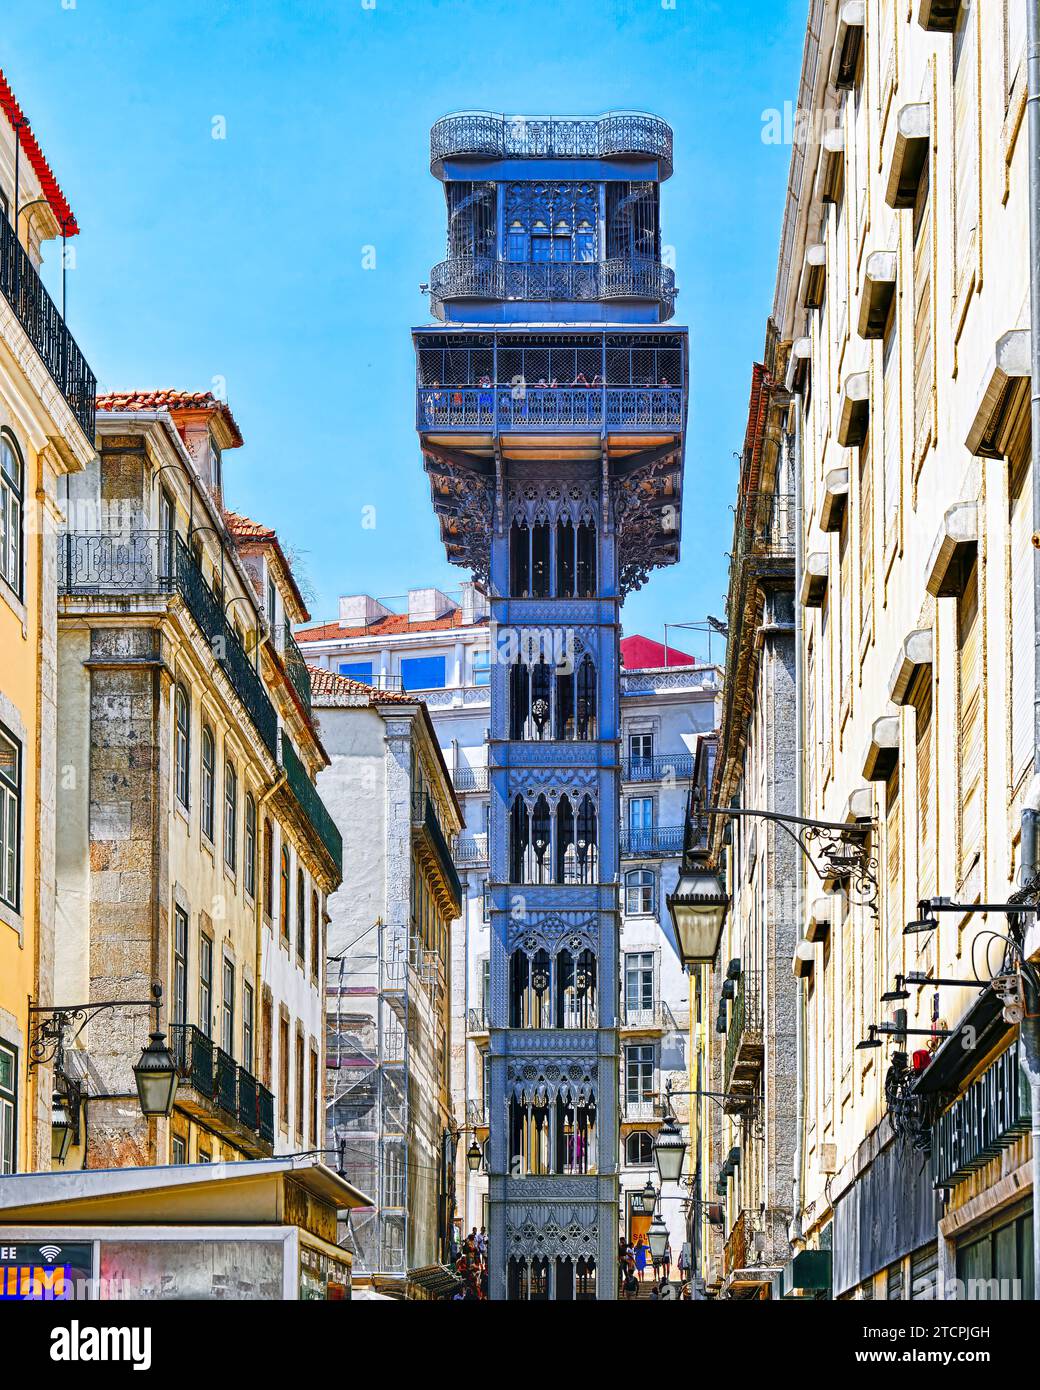 Low Angle View of the Lift of Santa Justa, Lisbon, Portugal Stock Photo